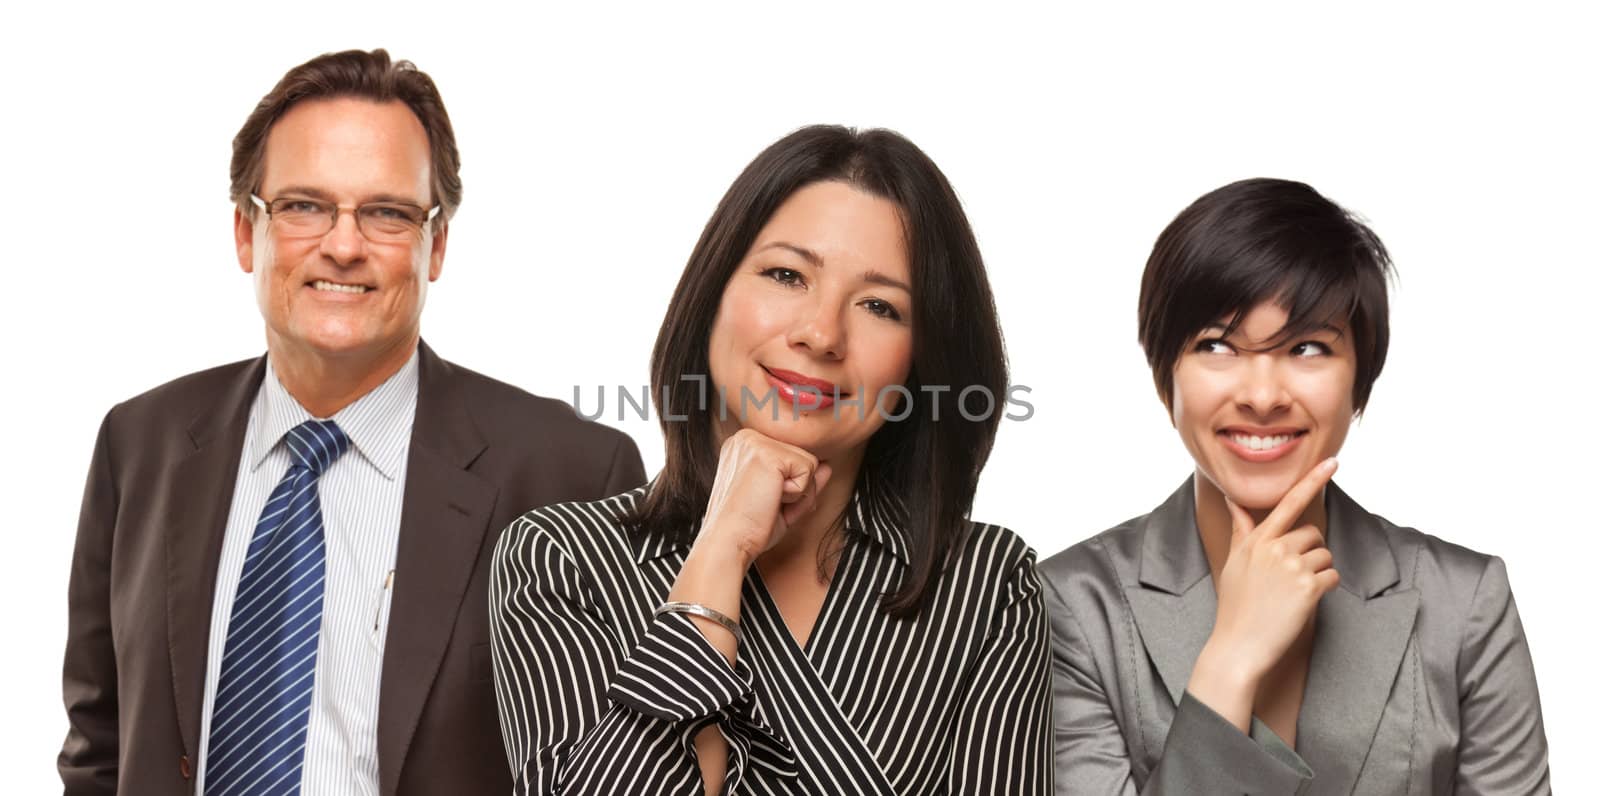 Hispanic Women and Businessman Isolated on a White Background.